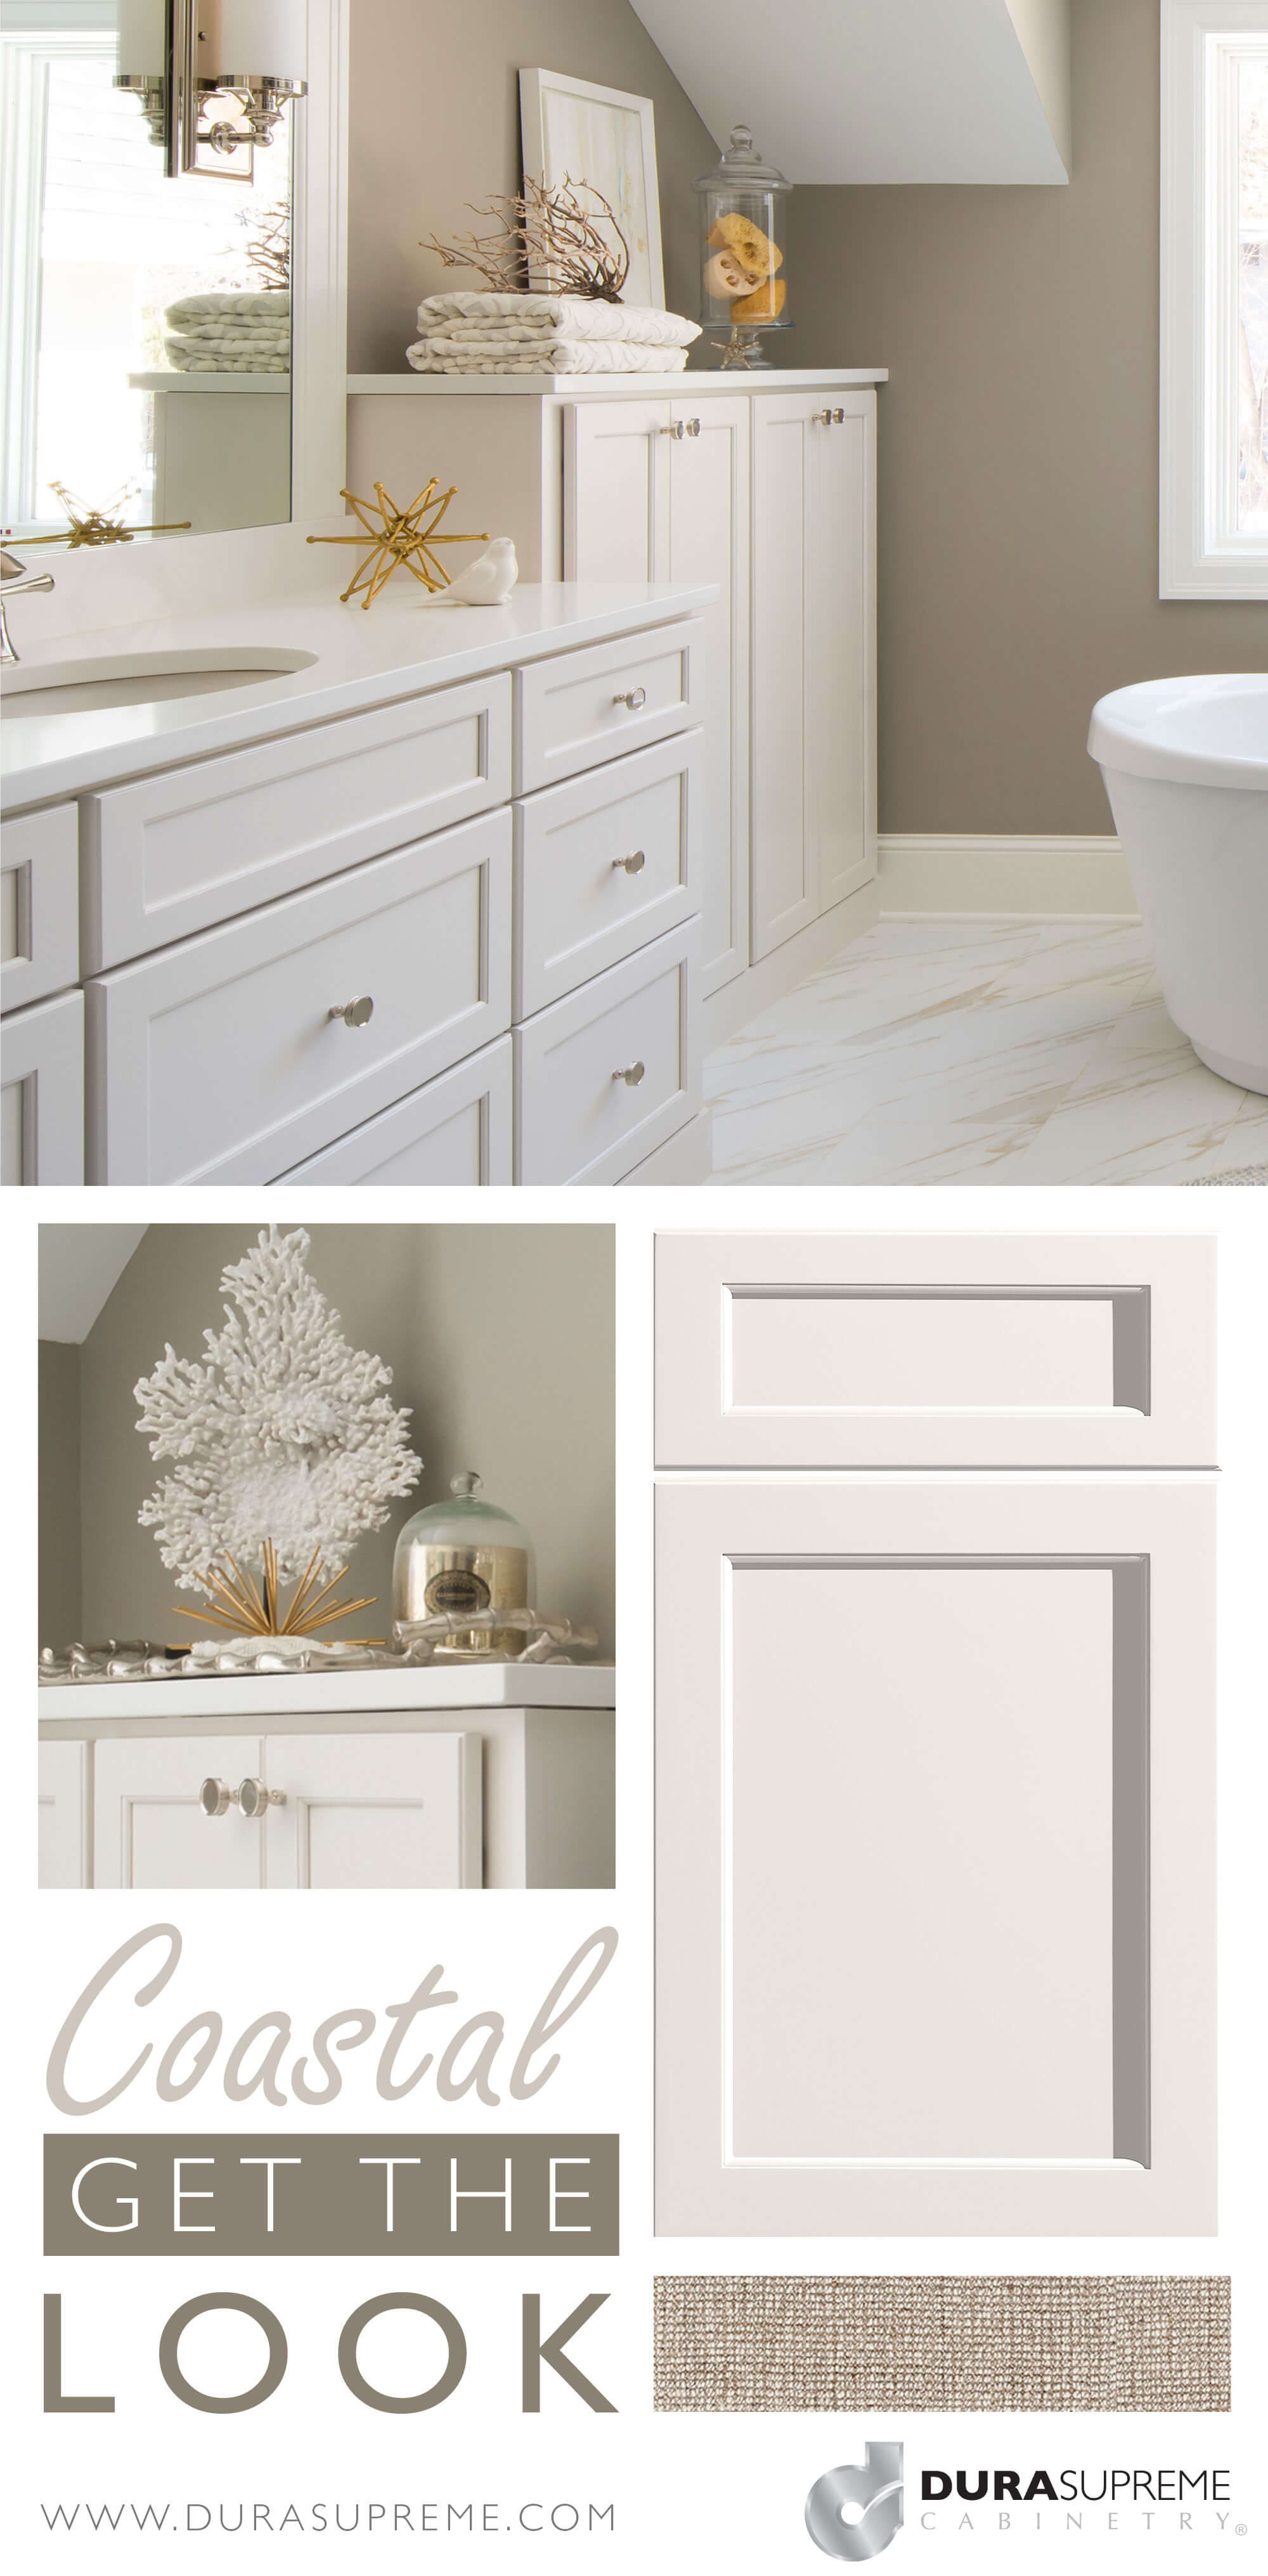 Learn how to get the look of Coastal style in your interior design and cabinetry design.